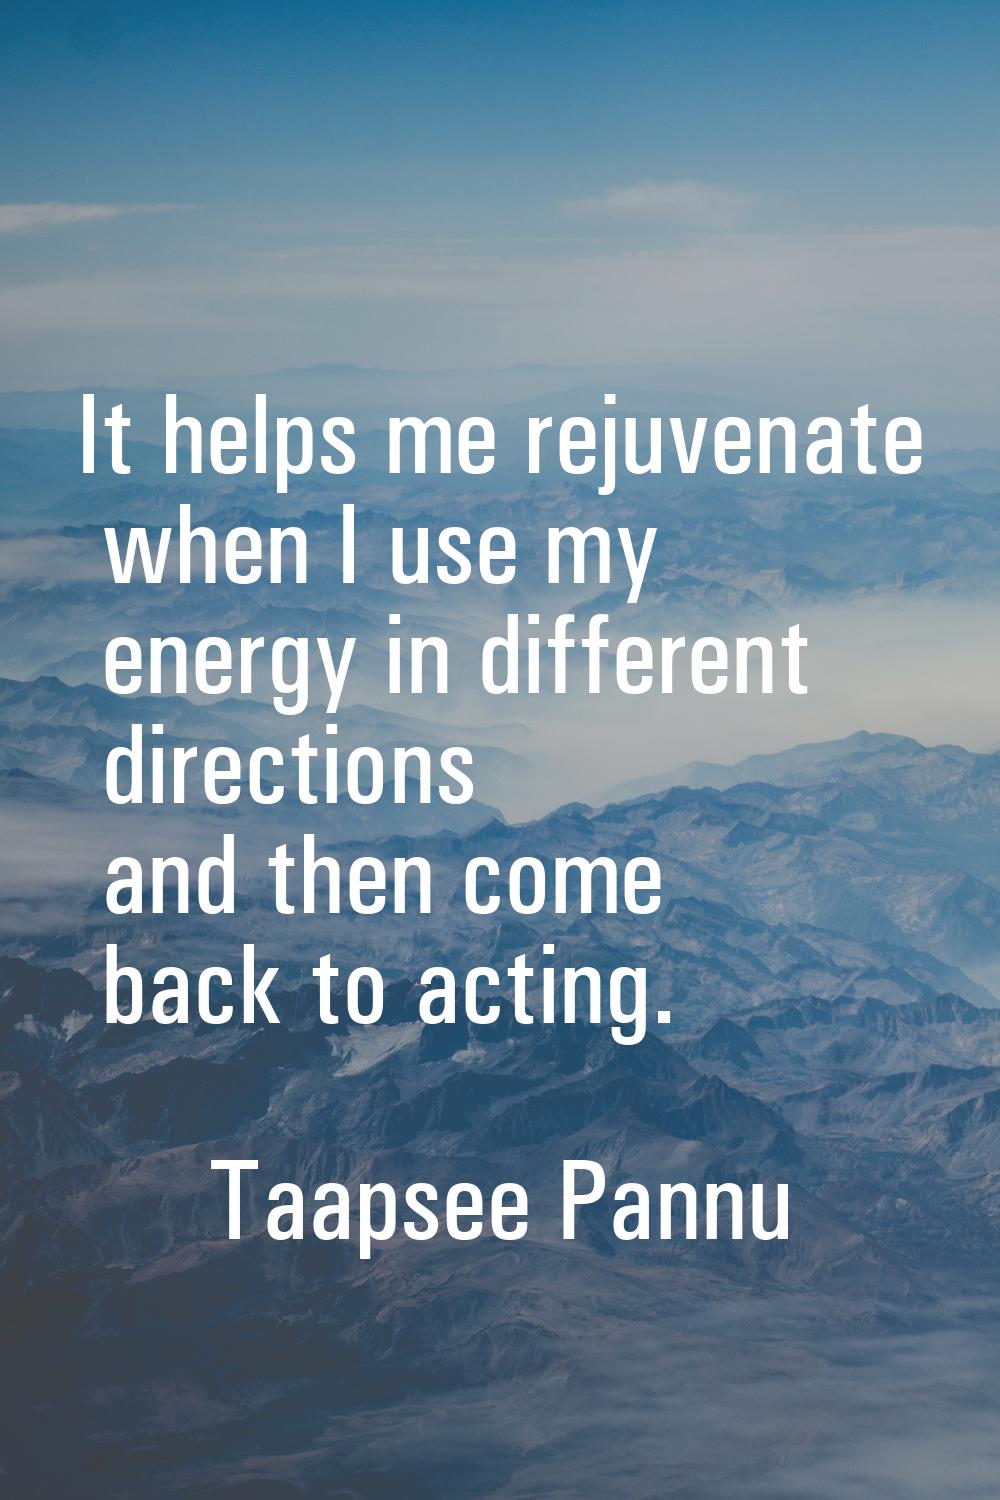 It helps me rejuvenate when I use my energy in different directions and then come back to acting.